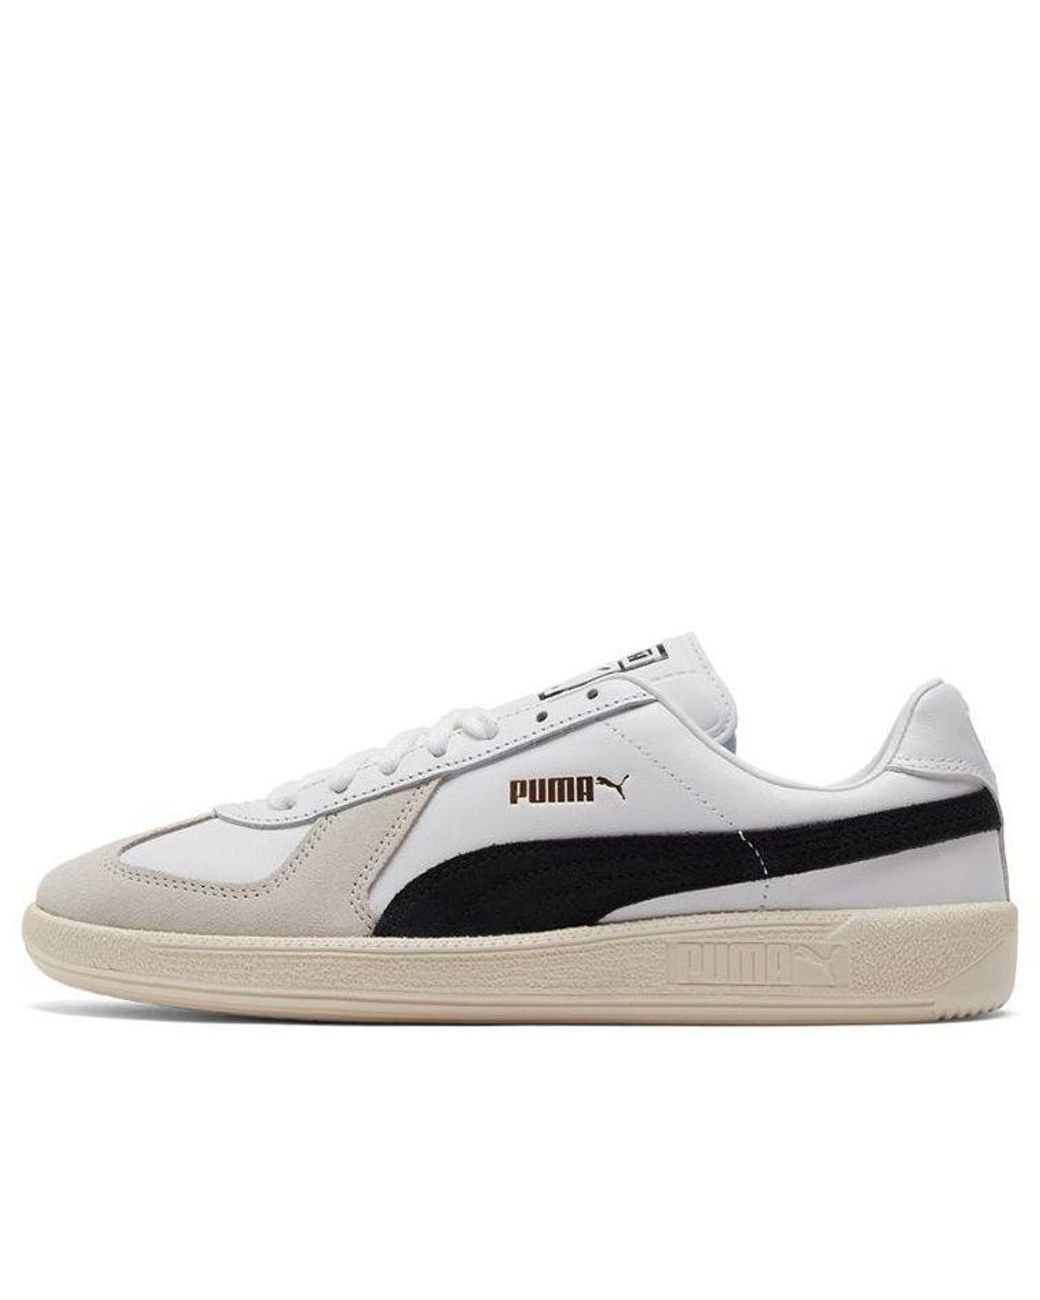 PUMA Army Trainer Casual Skateboarding Shoes White Gray | Lyst